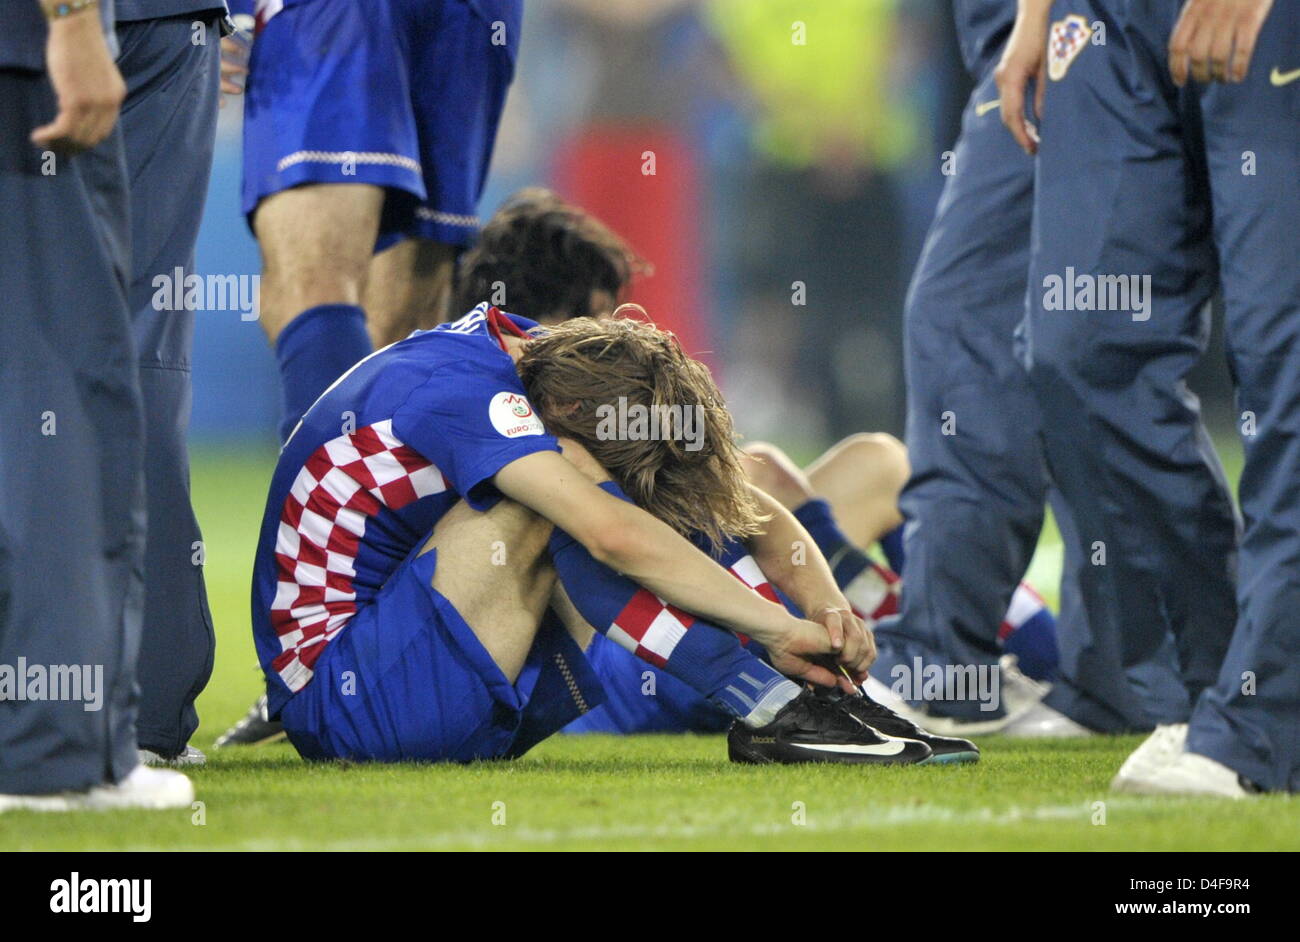 Luka Modric (C) of Croatia cries after the UEFA EURO 2008 quarter final match between Croatia and Turkey at the Ernst Happel stadium in Vienna, Austria, 20 June 2008. Turkey won 1:3 in penalty shootout. Photo: Achim Scheidemann dpa +please note UEFA restrictions particulary in regard to slide shows and 'No Mobile Services'+ +++(c) dpa - Bildfunk+++ Stock Photo